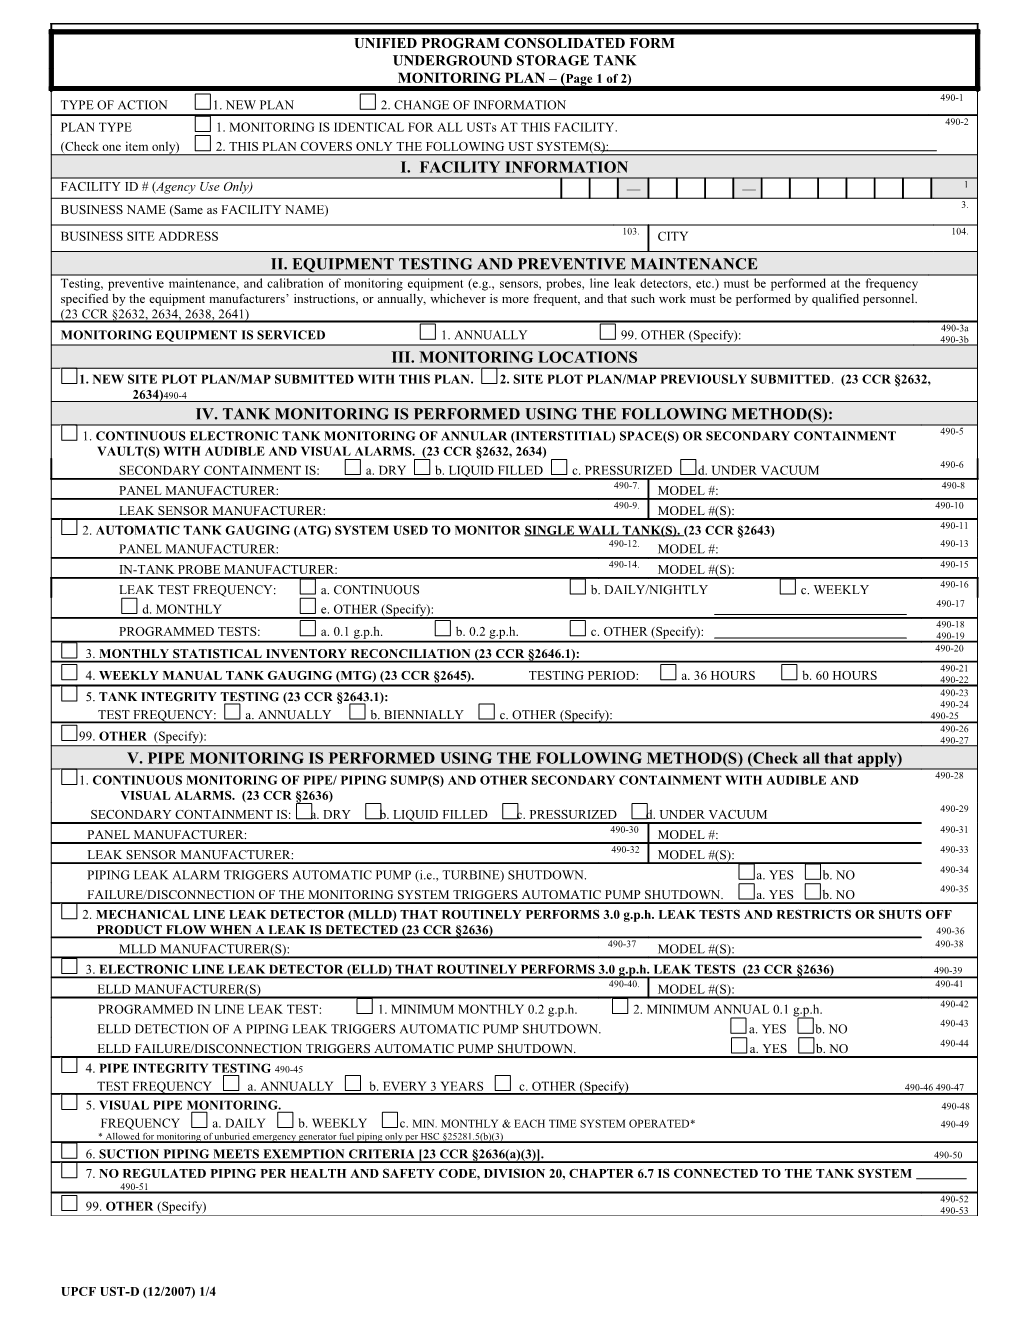 Unified Program Consolidated Form s1